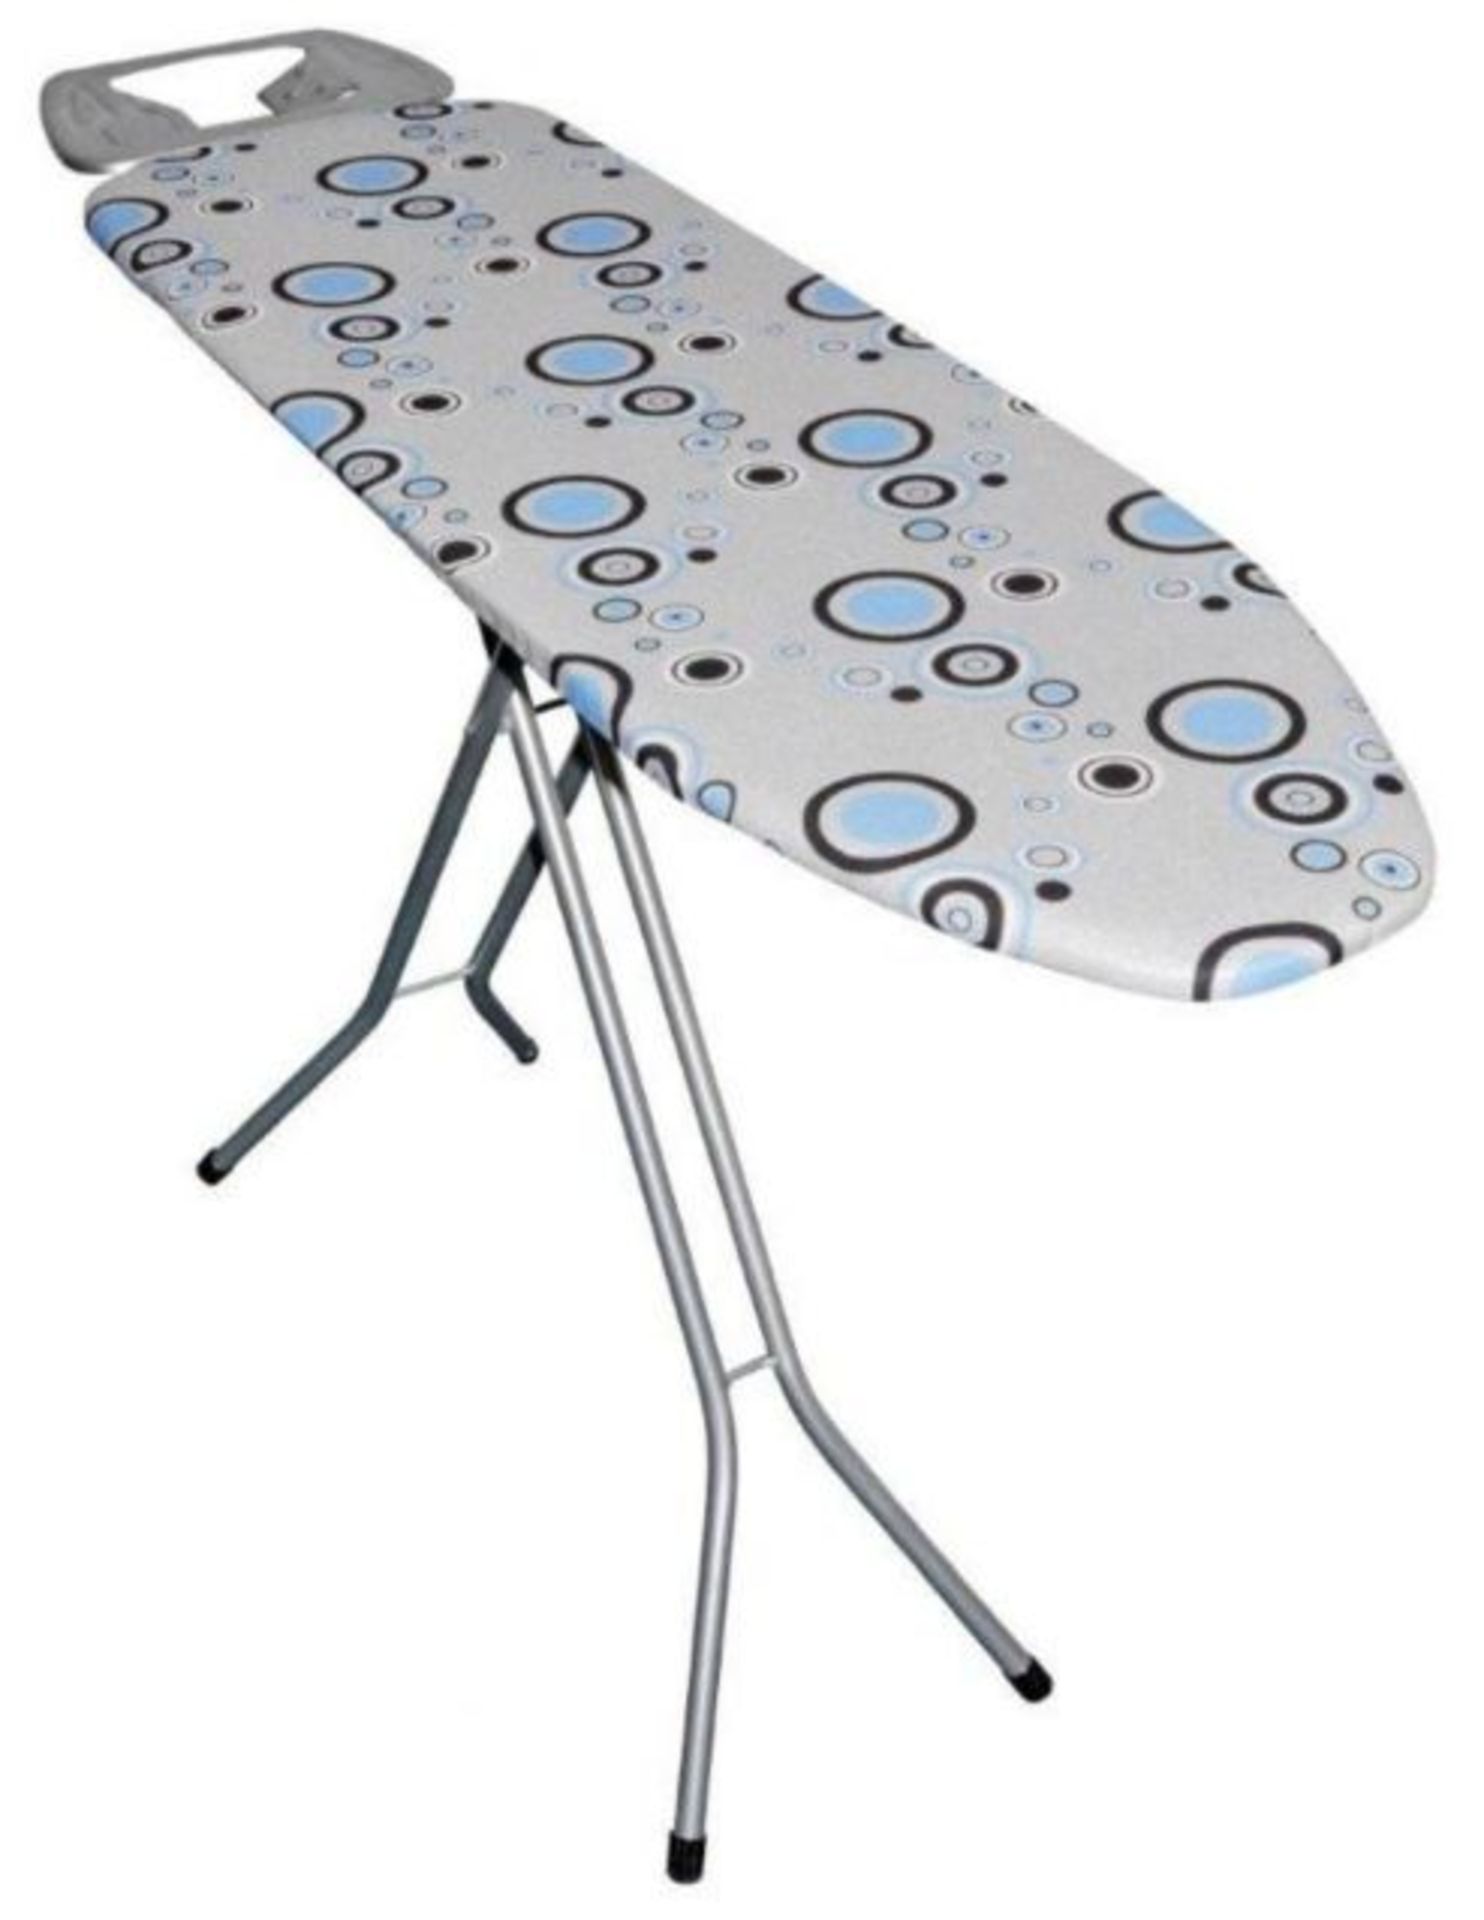 V *TRADE QTY* Brand New Butler Metal Framed Ironing Board X 10 YOUR BID PRICE TO BE MULTIPLIED BY